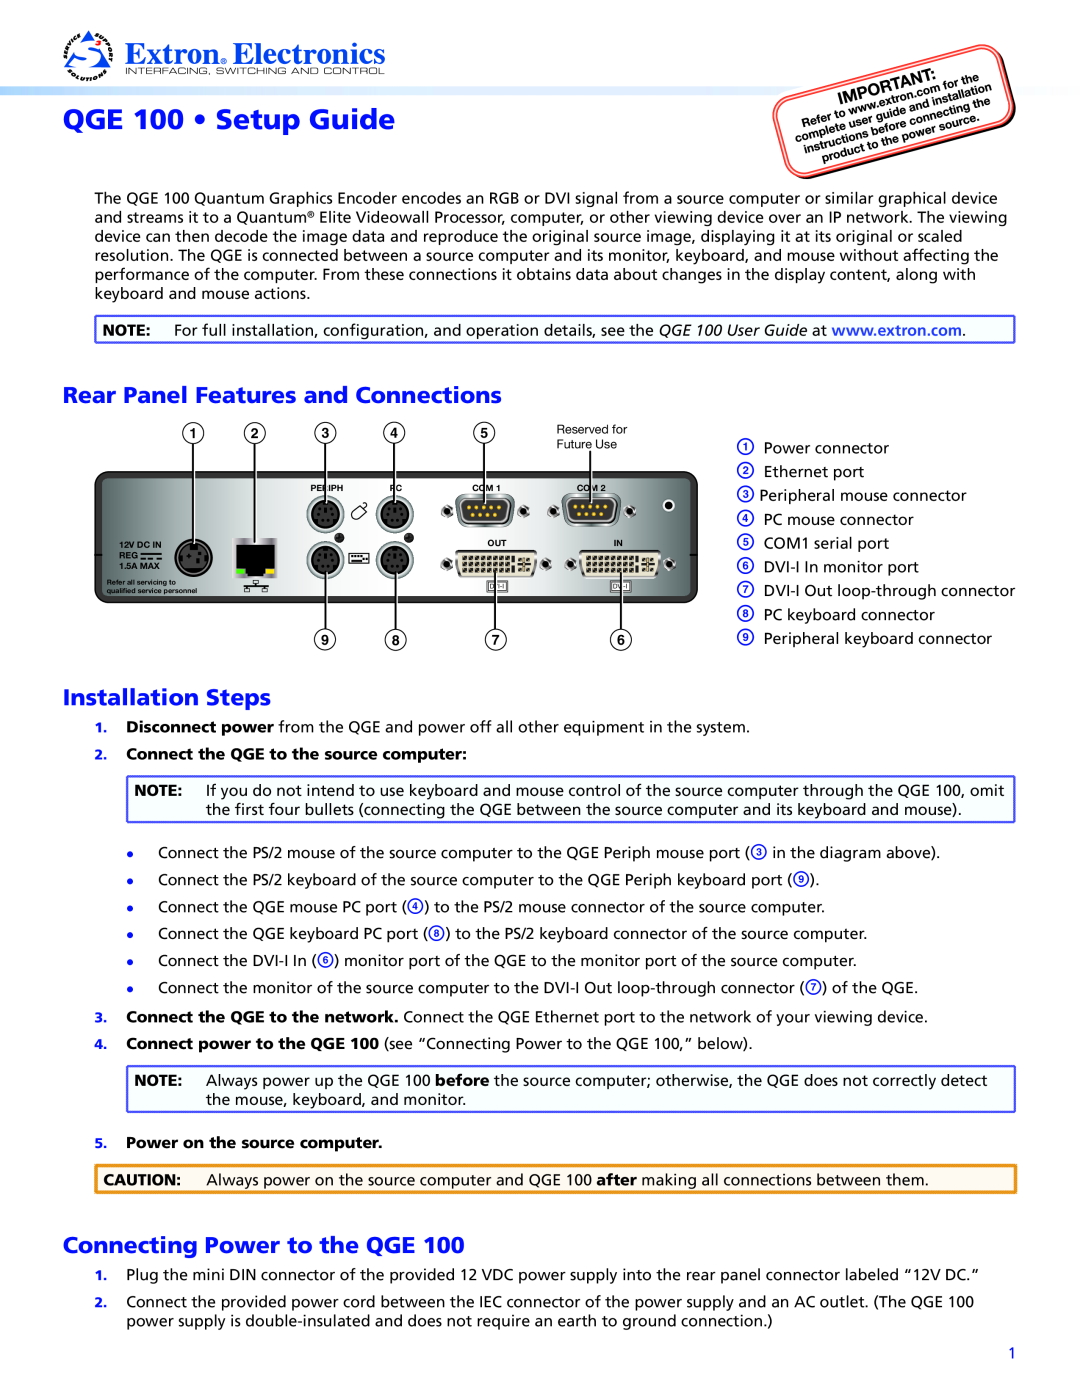 Extron electronic setup guide QGE 100 Setup Guide, Rear Panel Features and Connections, Installation Steps 